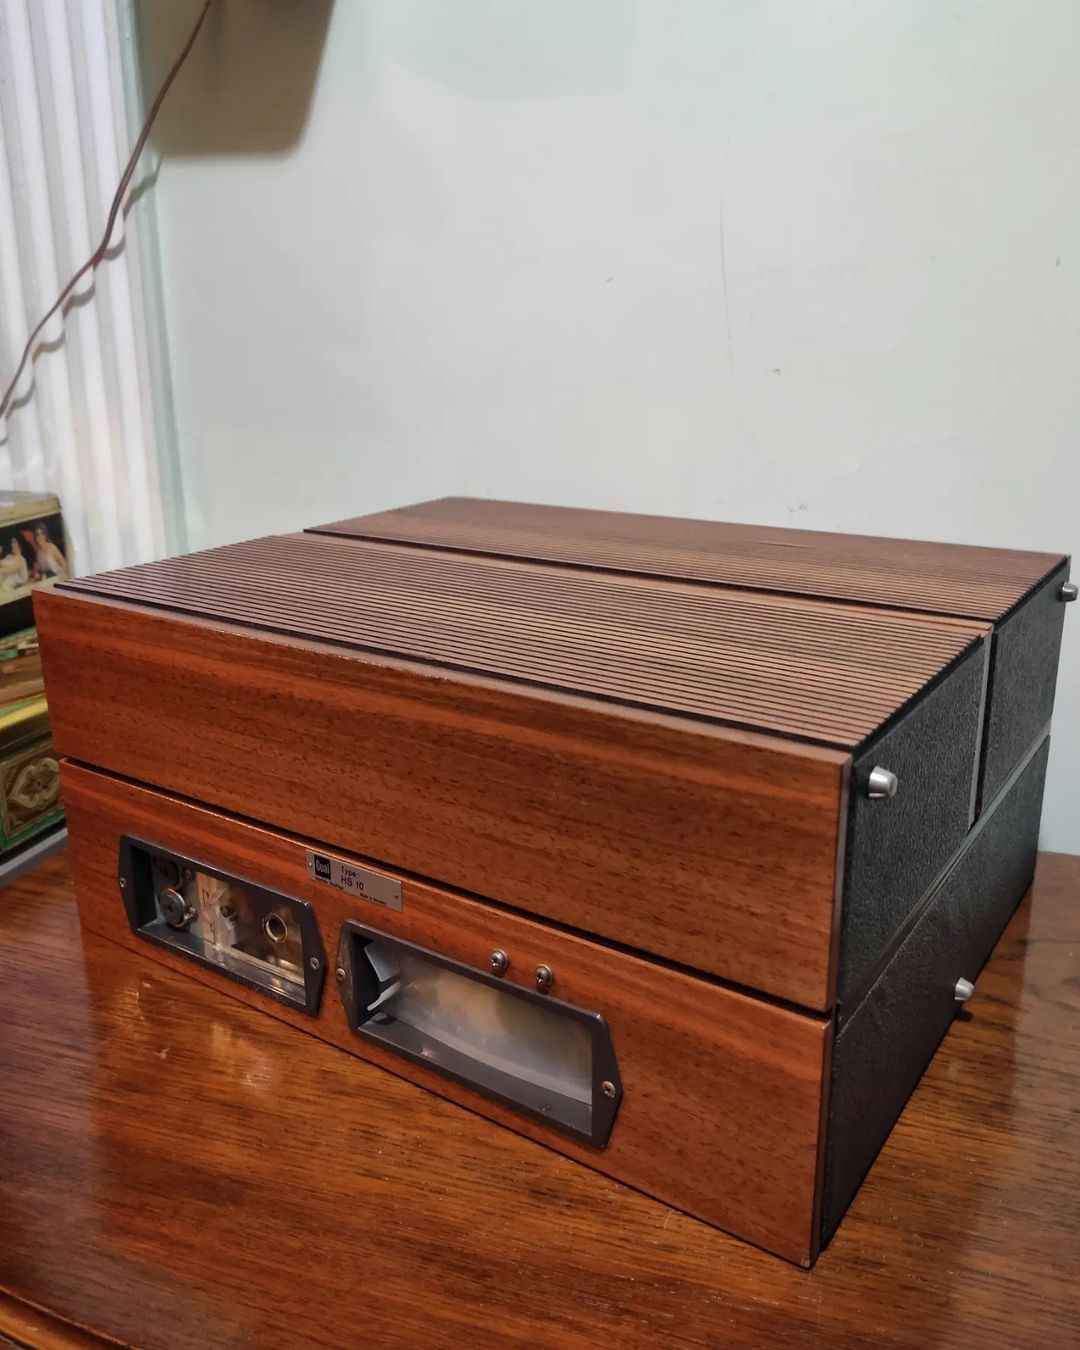 Dual brand HS 10 model record player